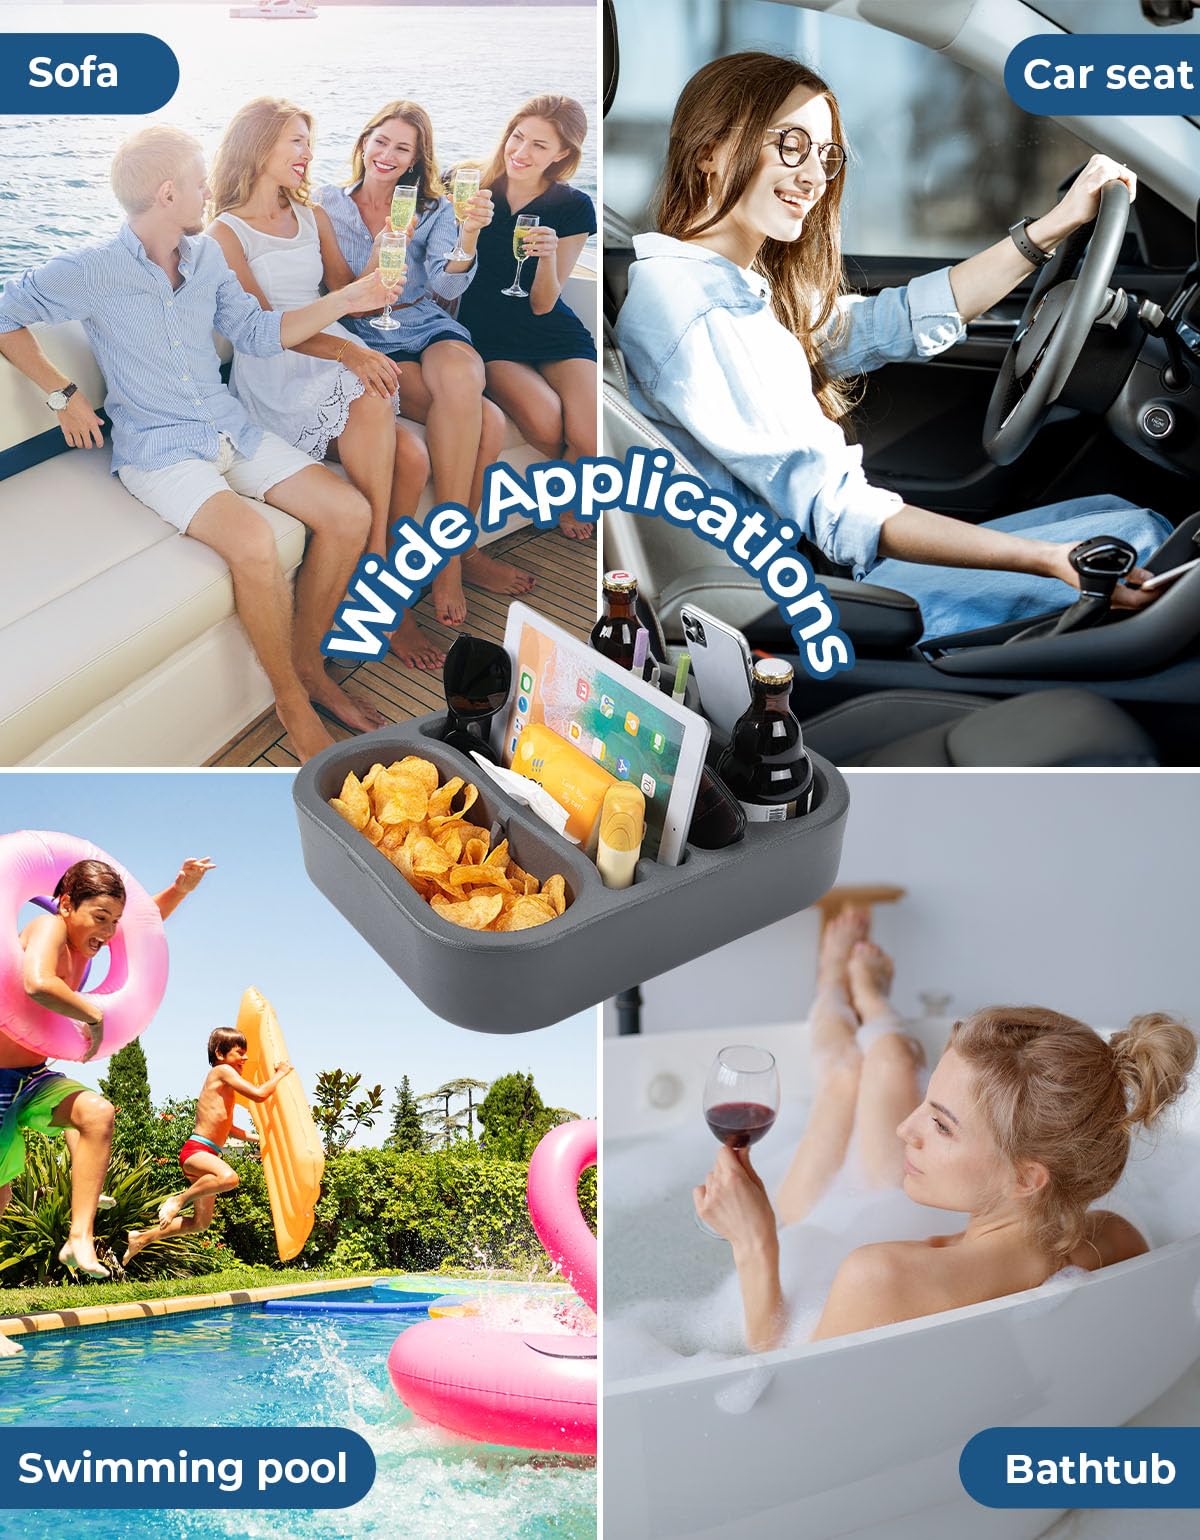 Floating Drink Holder, Cup Holder for for Sofa on Board or Car Seat - Kemimoto